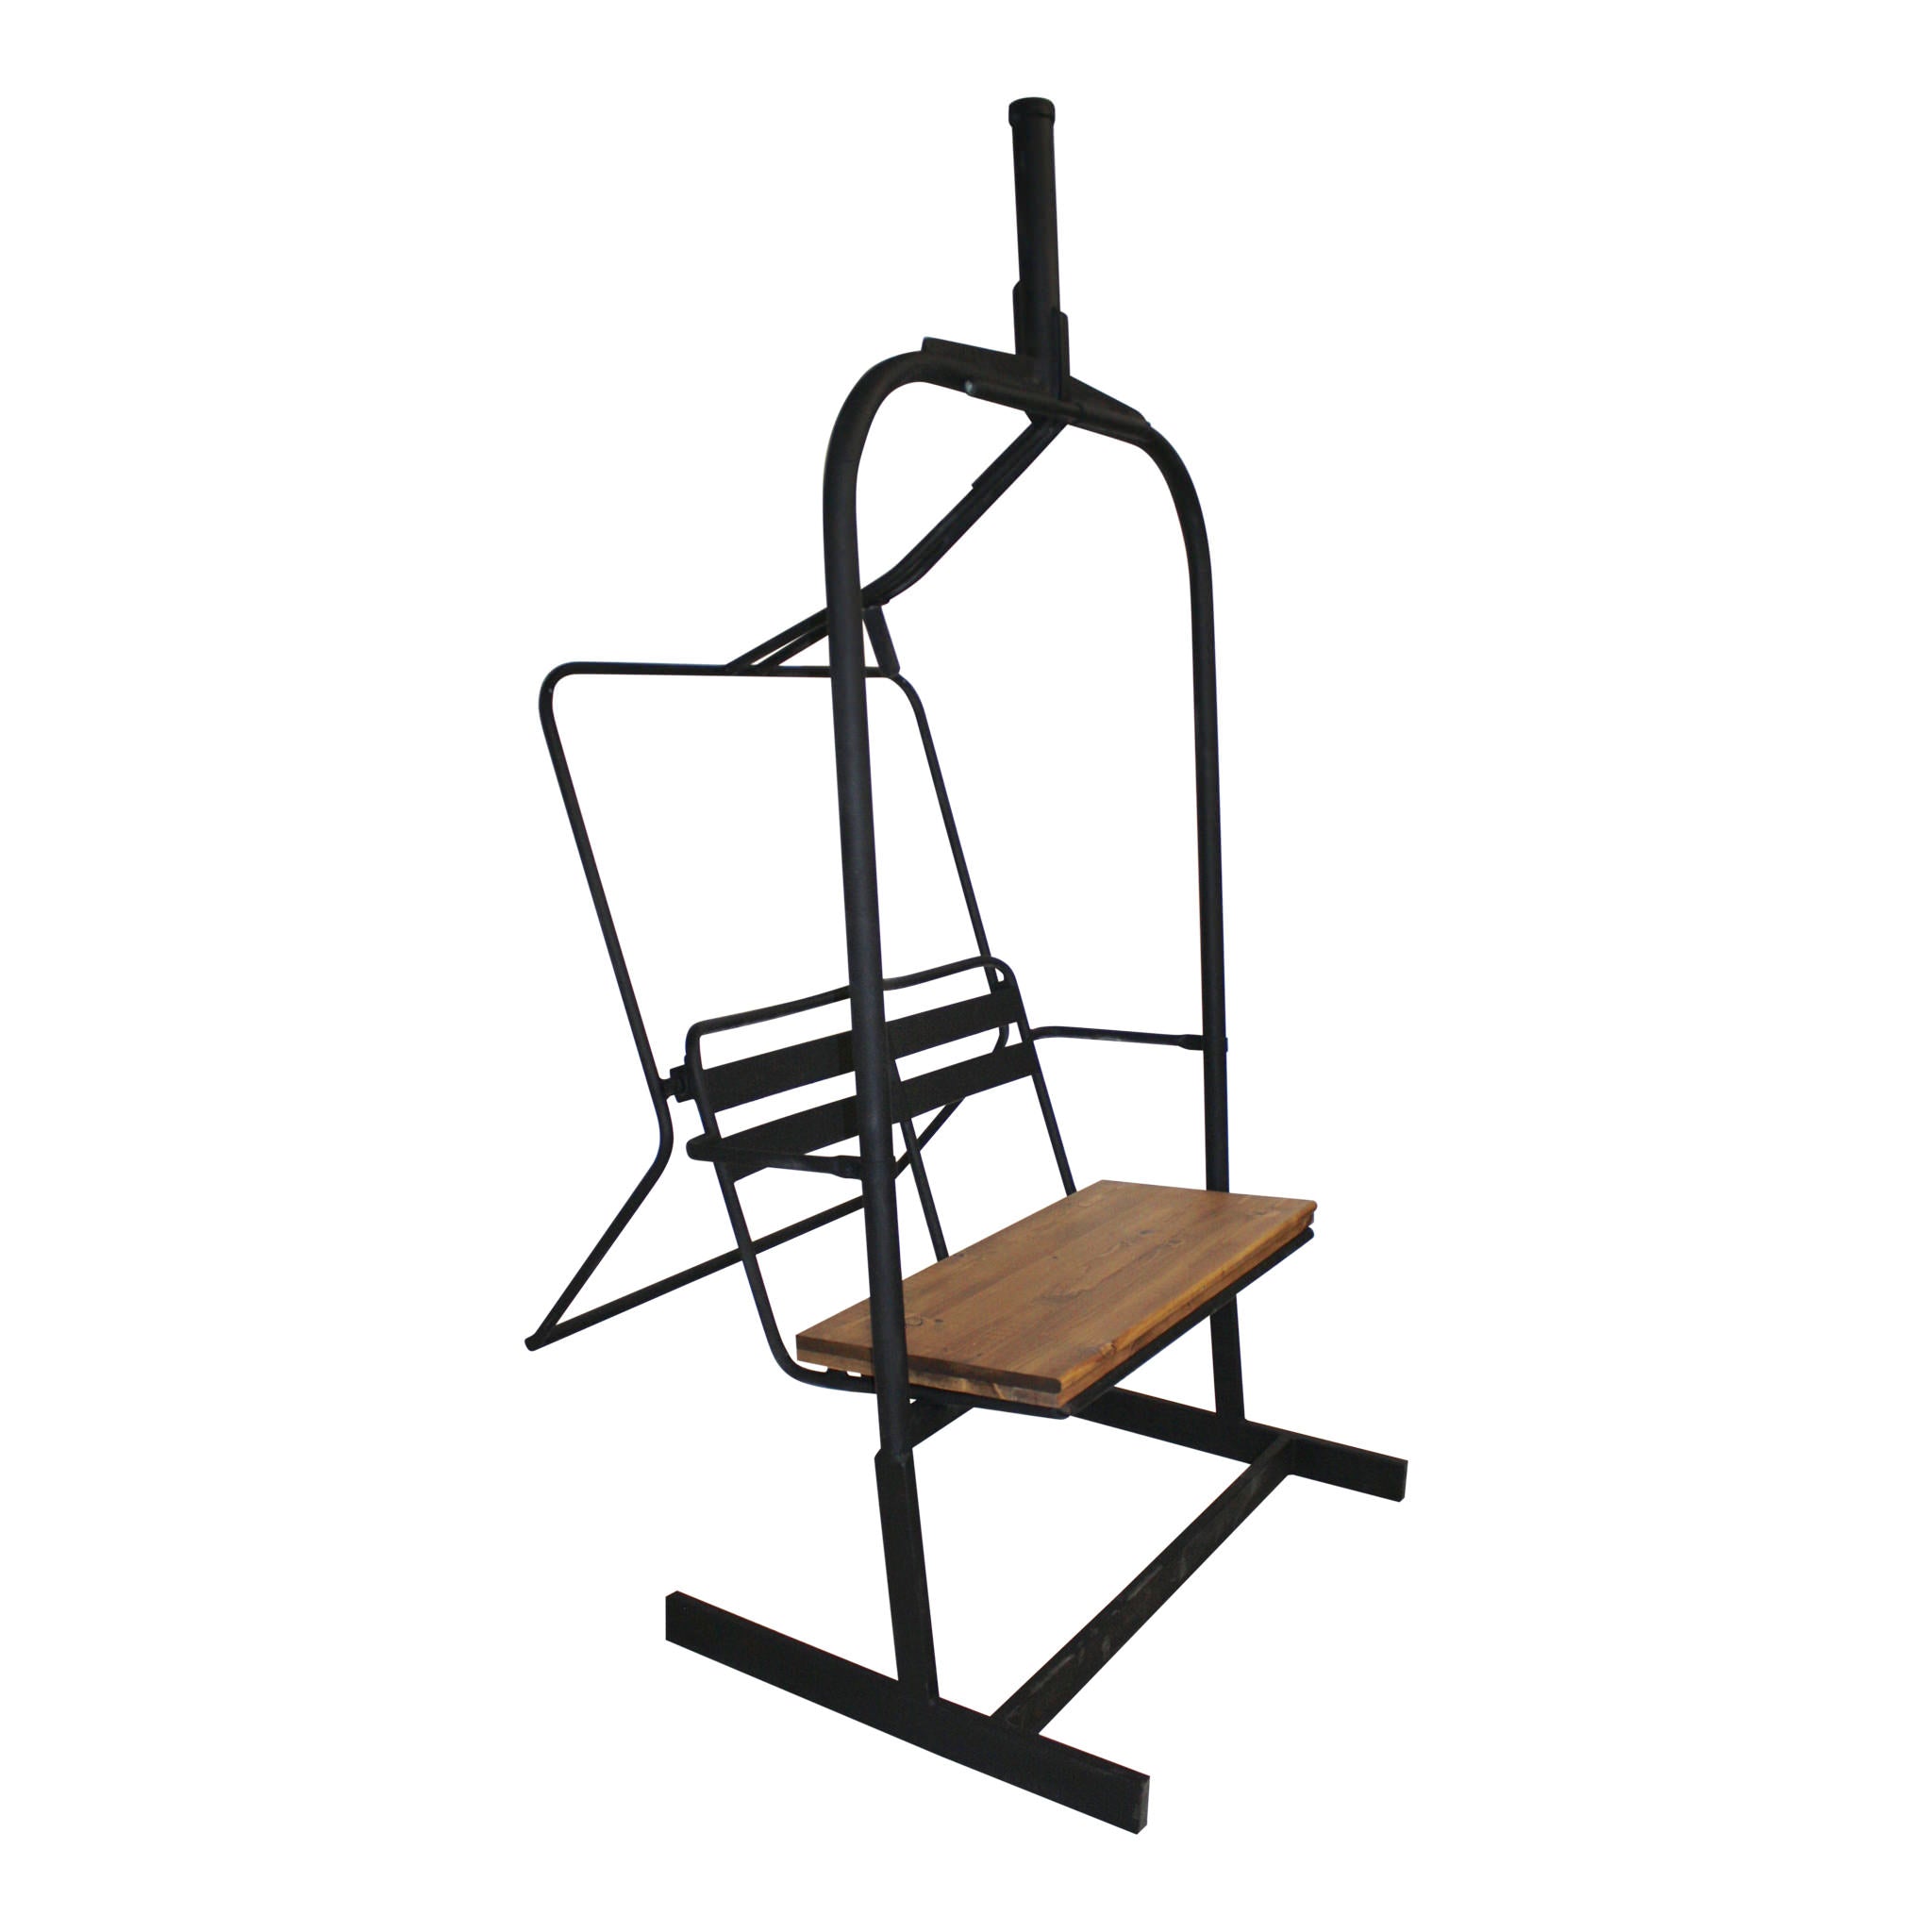 Double Ski Lift Chair from Snowmass